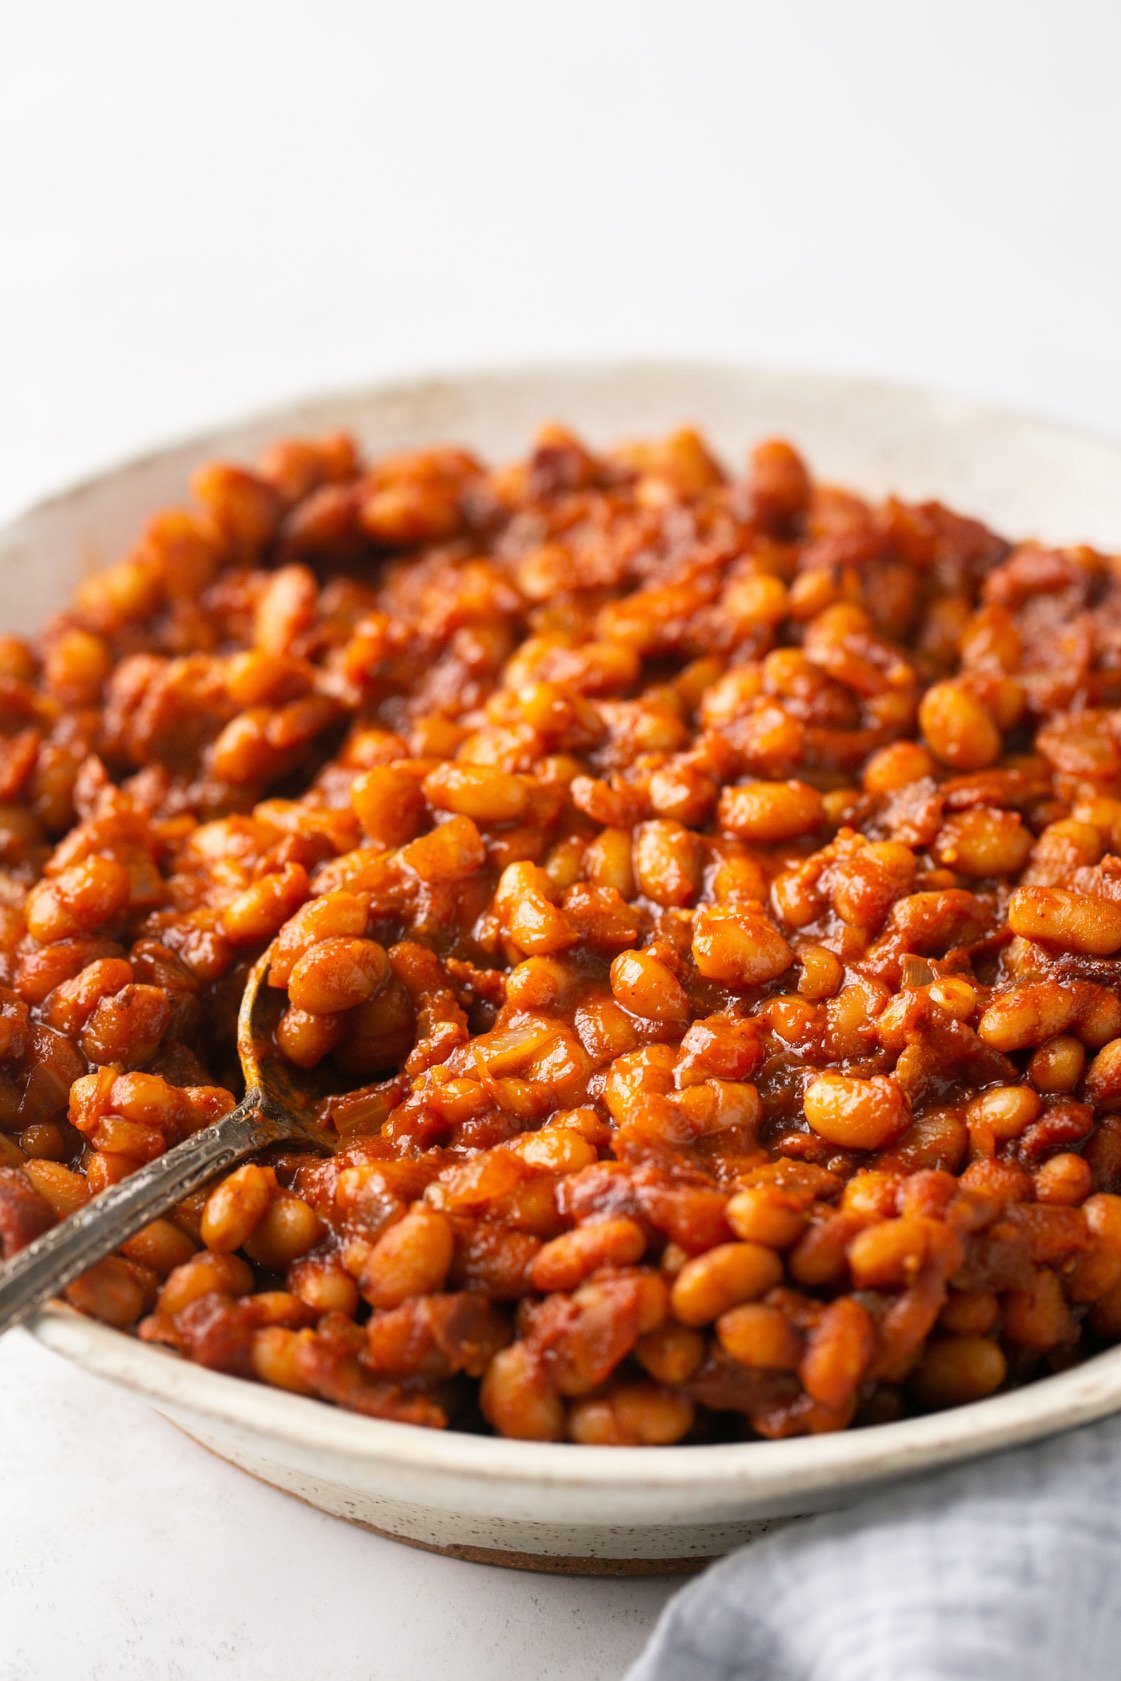 baked beans in a white bowl with a silver spoon